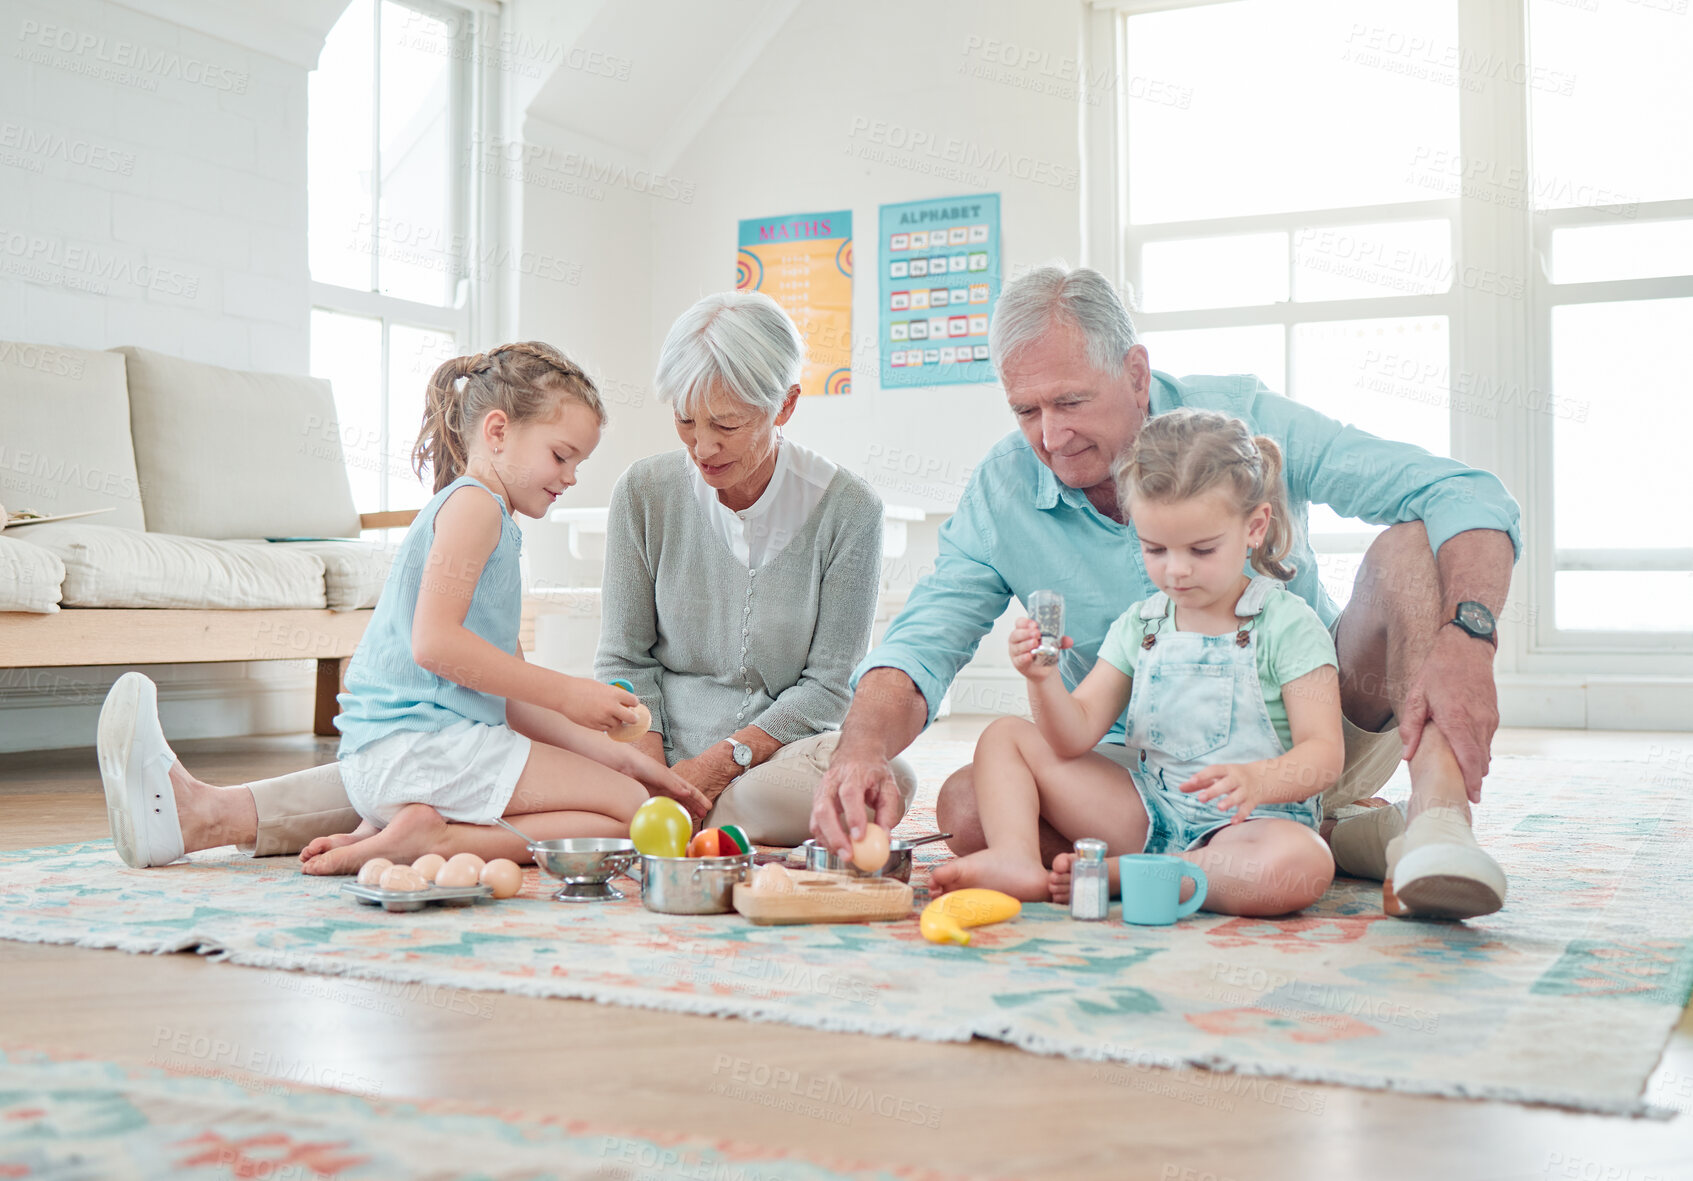 Buy stock photo Shot of two little girls playing with their toys while sitting at home with their grandparents